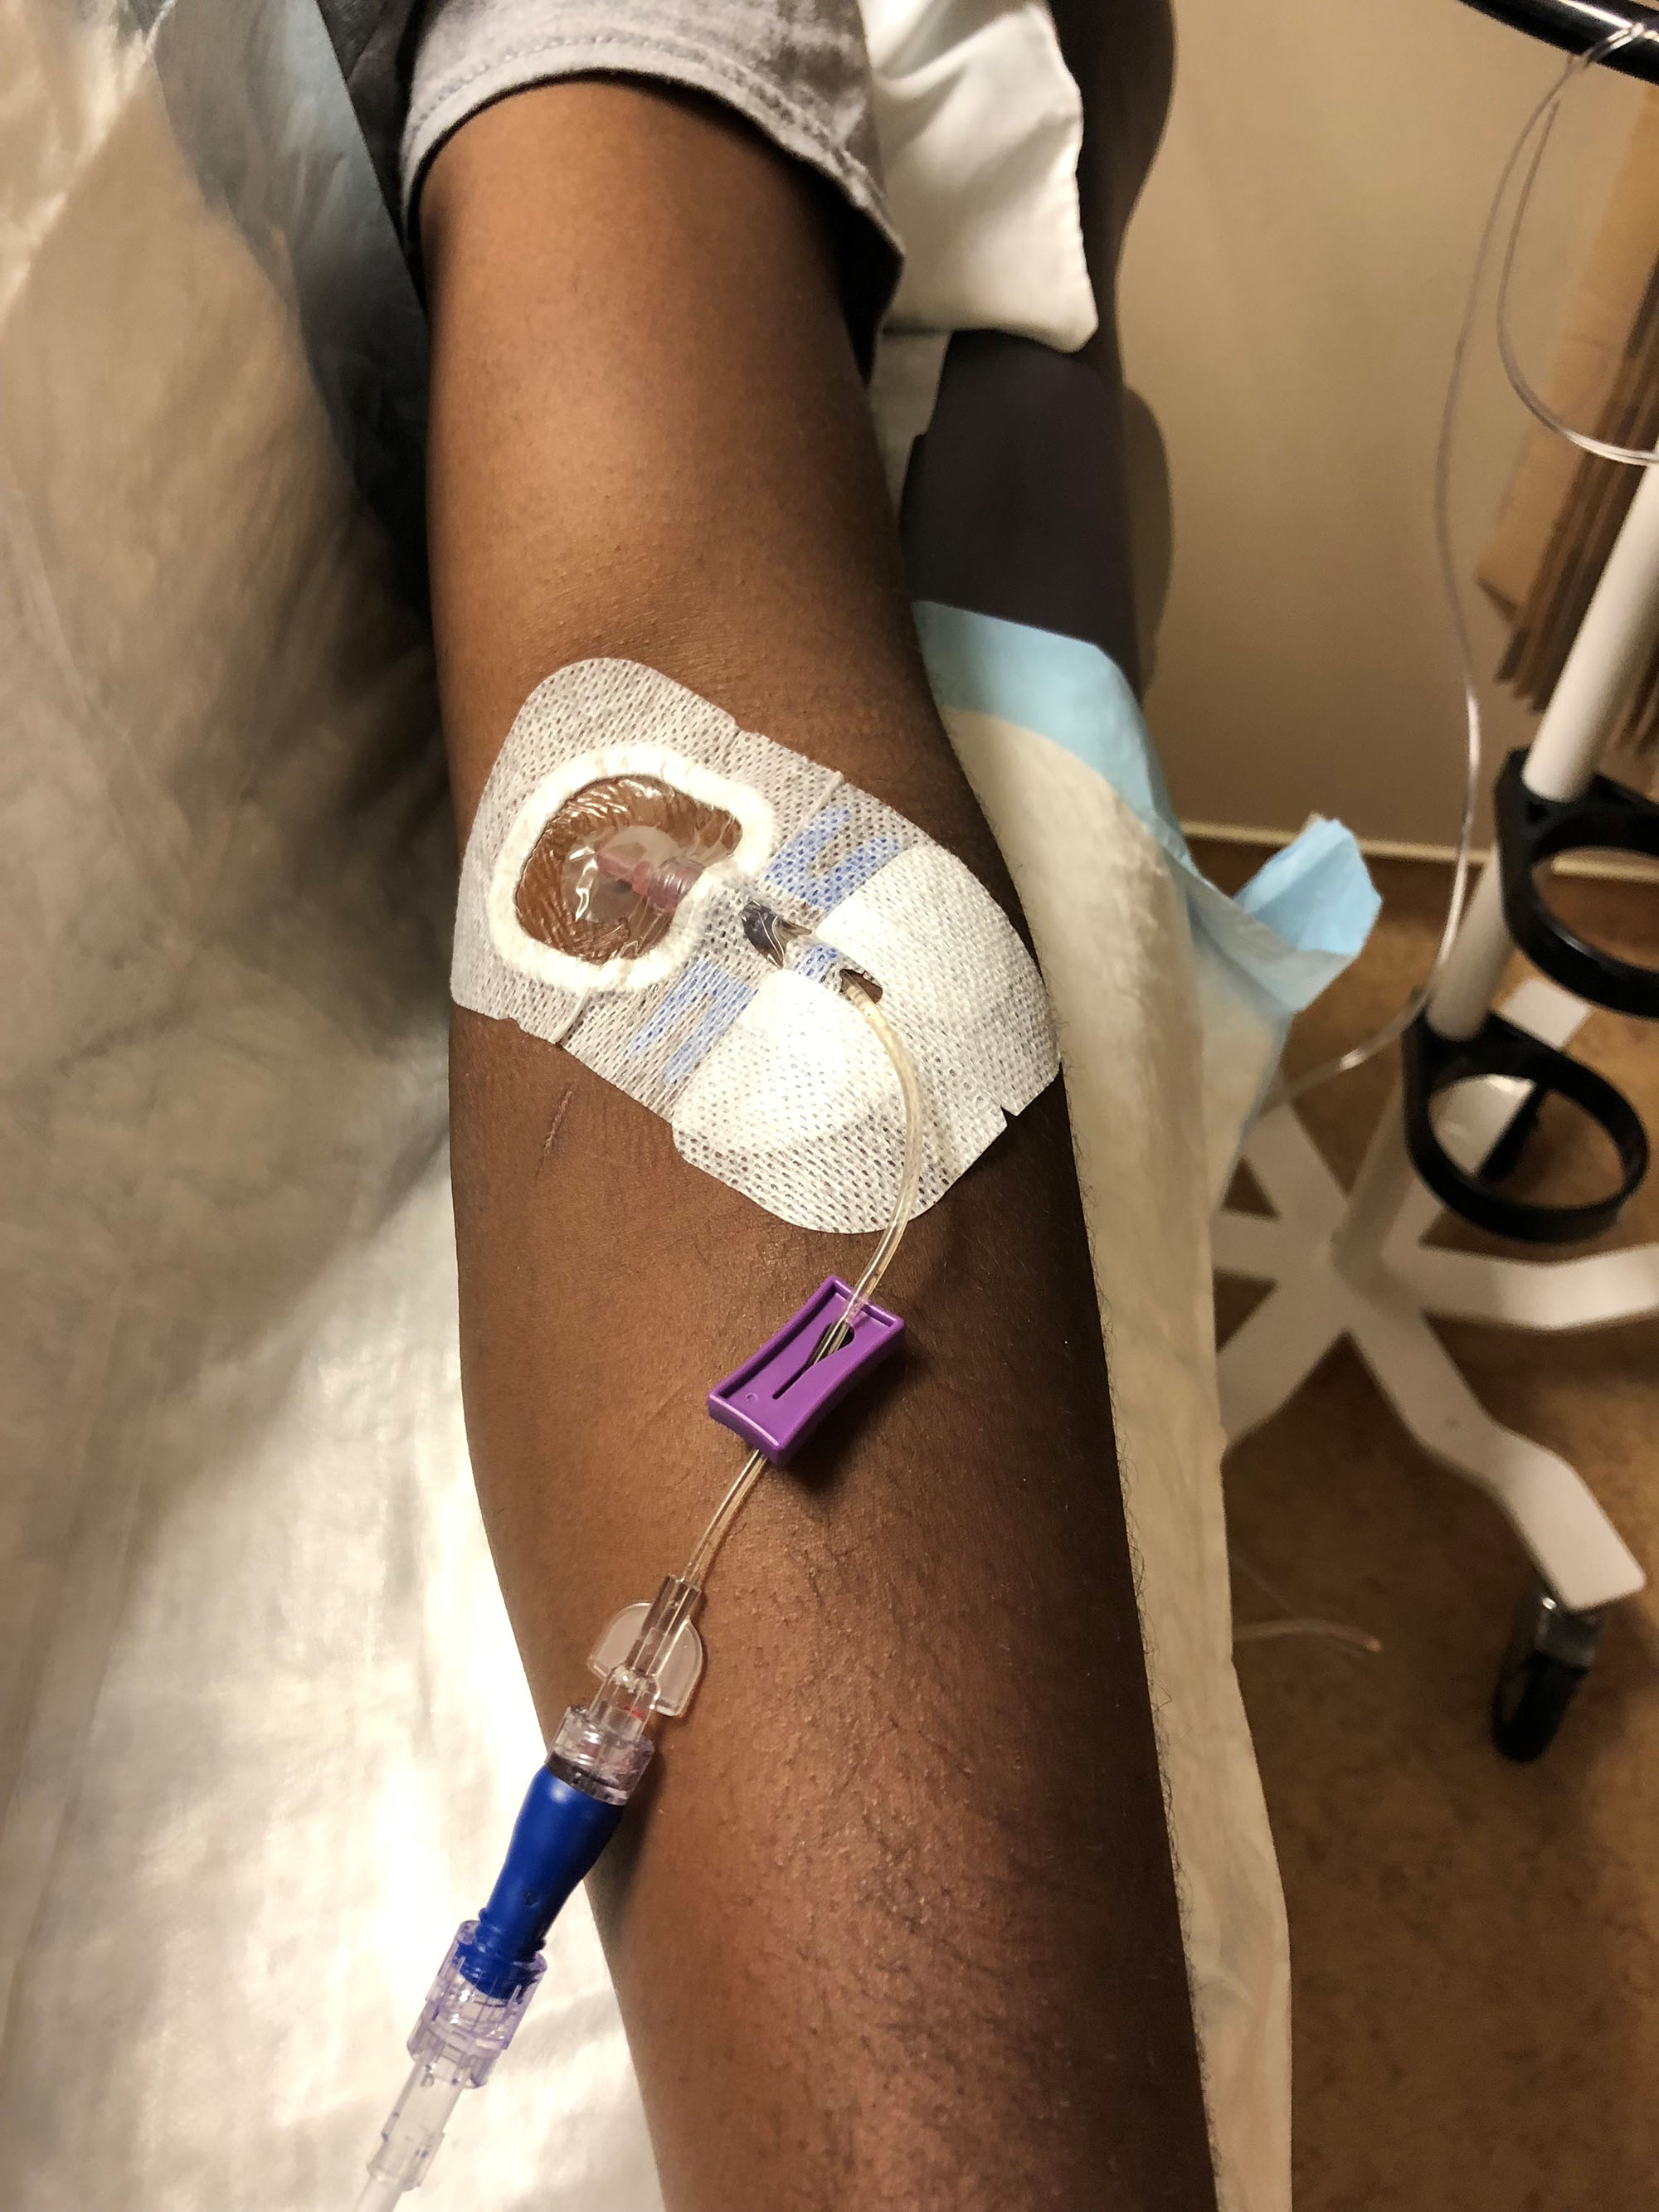 Image of volunteer receiving IV infusion